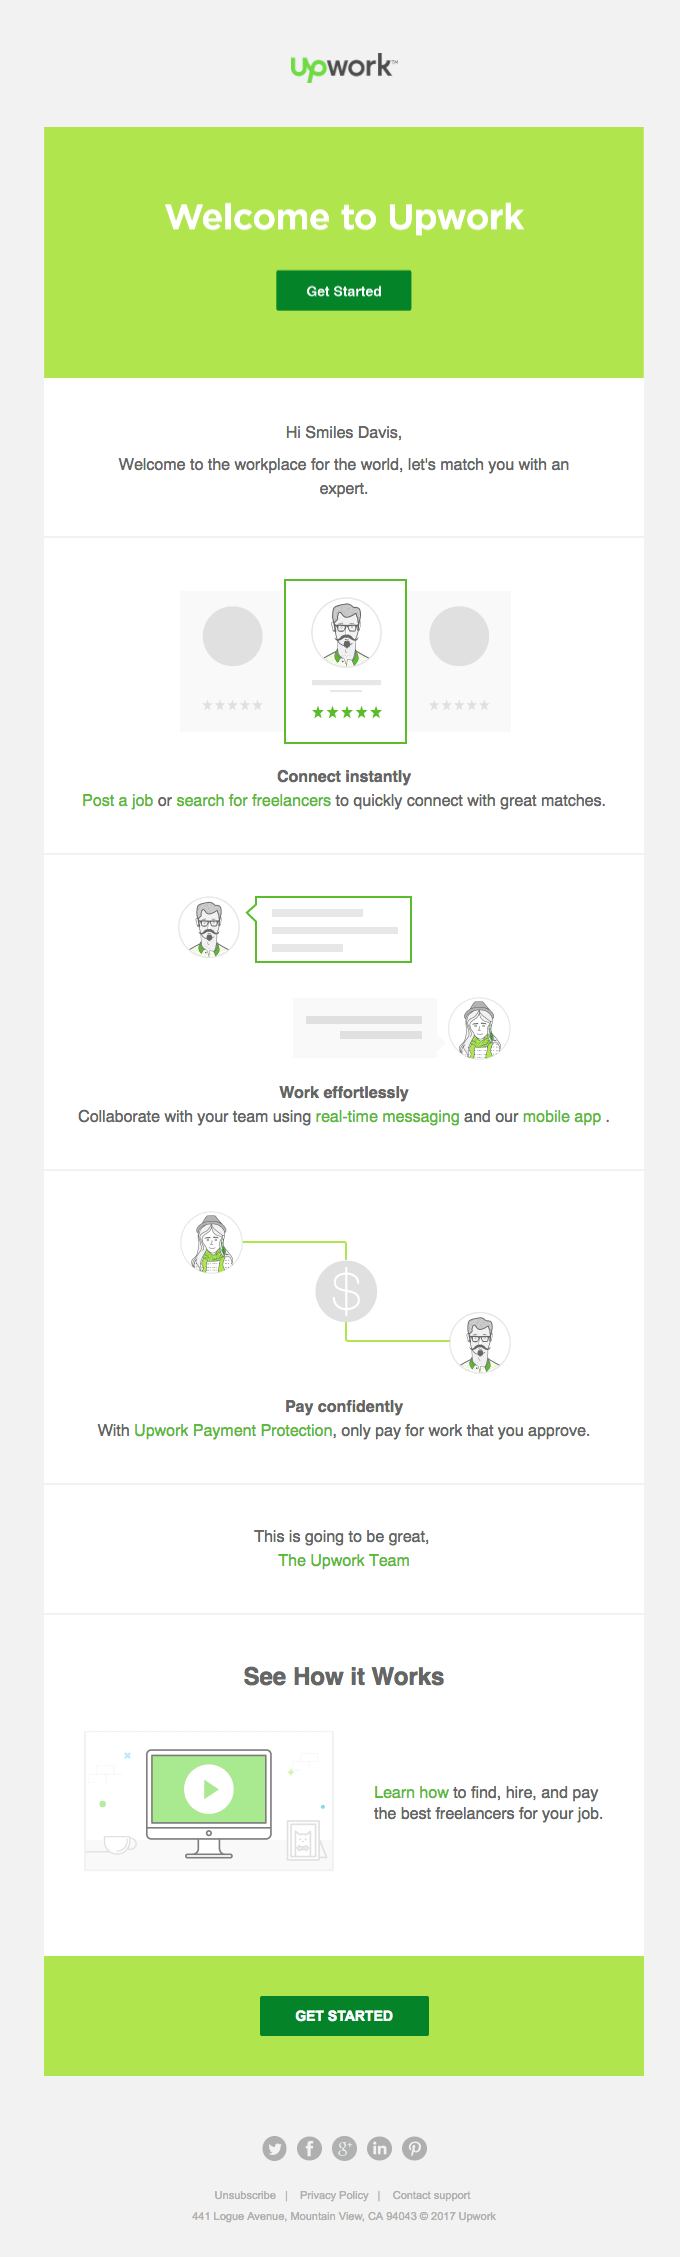 welcome-to-upwork-let-s-get-started